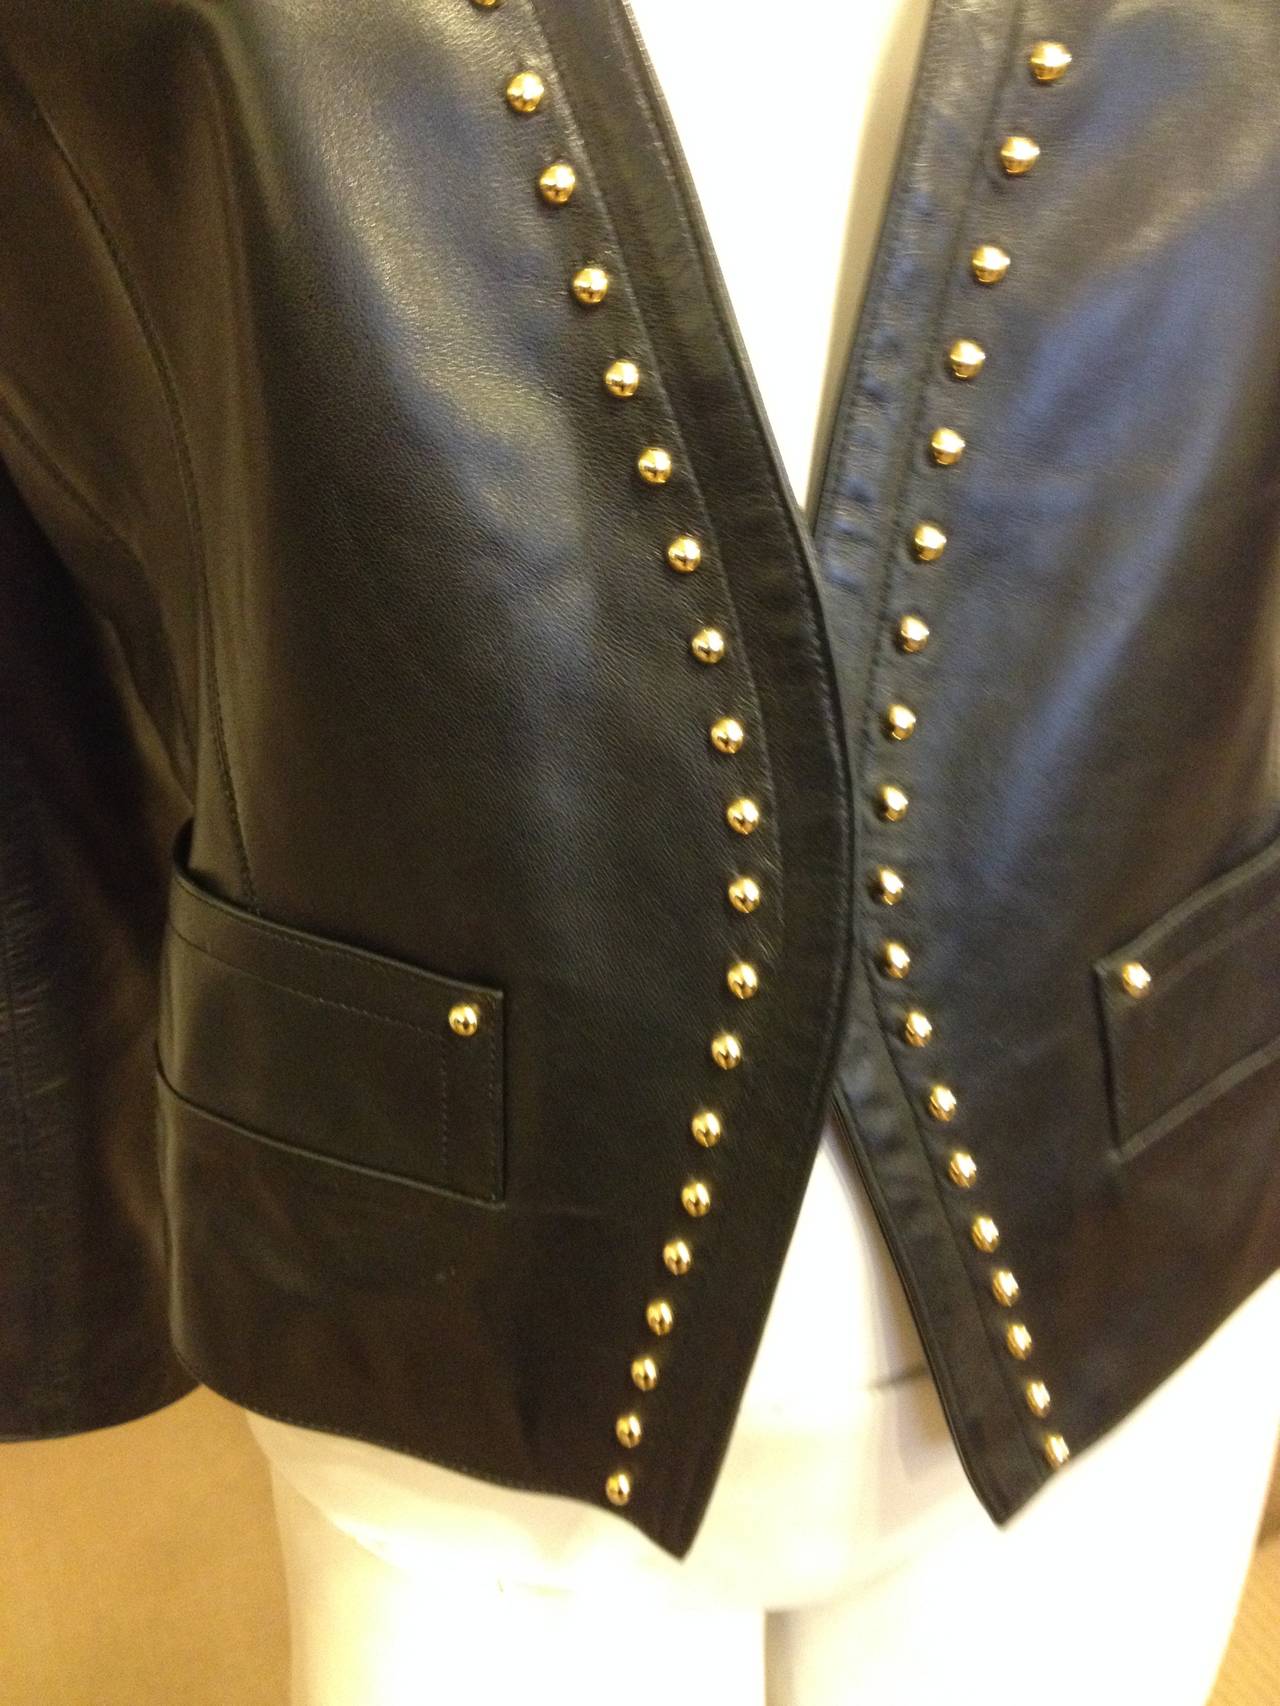 Shine bright! This fabulous leather Yves Saint Laurent jacket is tailored perfectly, with structured padded shoulders and a deep v-neck. The front is punctuated with a series of little gold round studs, adding just the right cool touch. This piece